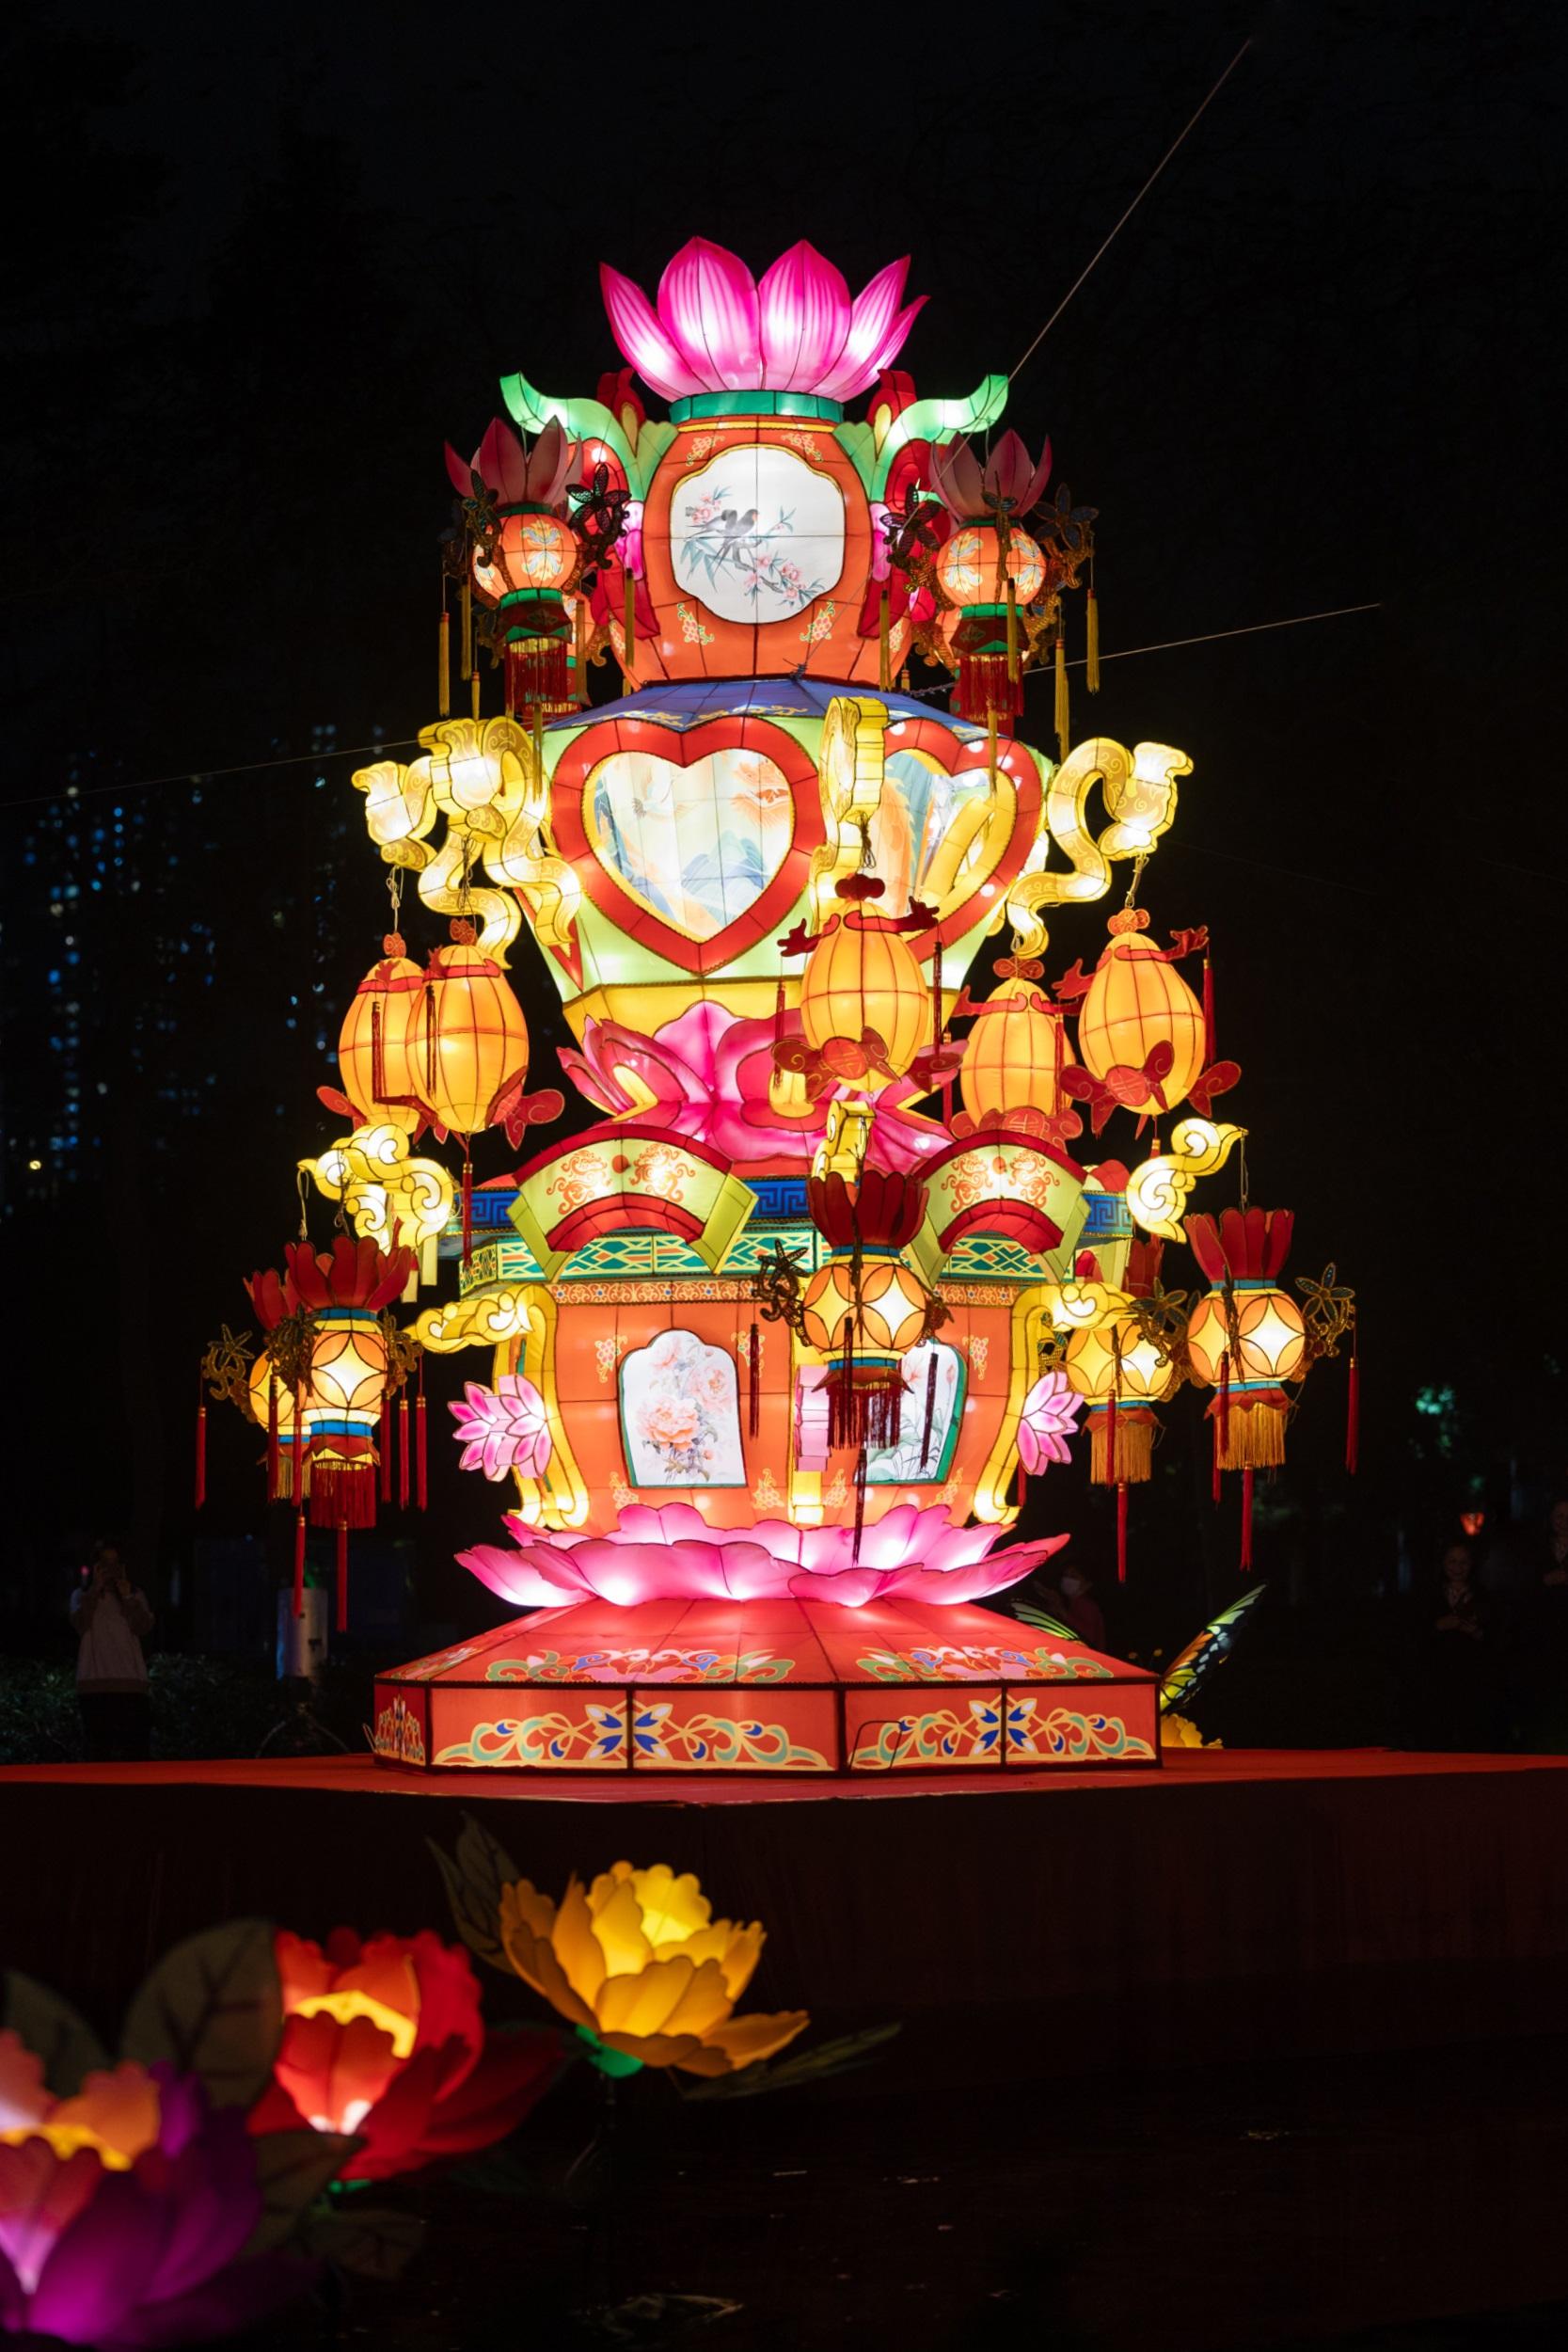 To celebrate the festive season with the public, the Leisure and Cultural Services Department is presenting the Lunar New Year Lantern Carnivals at the Hong Kong Cultural Centre Piazza, Hong Kong Velodrome Park, Tin Shui Wai Park and Ginza Square from today (February 20) until February 25. Picture shows colourful lanterns at Hong Kong Velodrome Park.